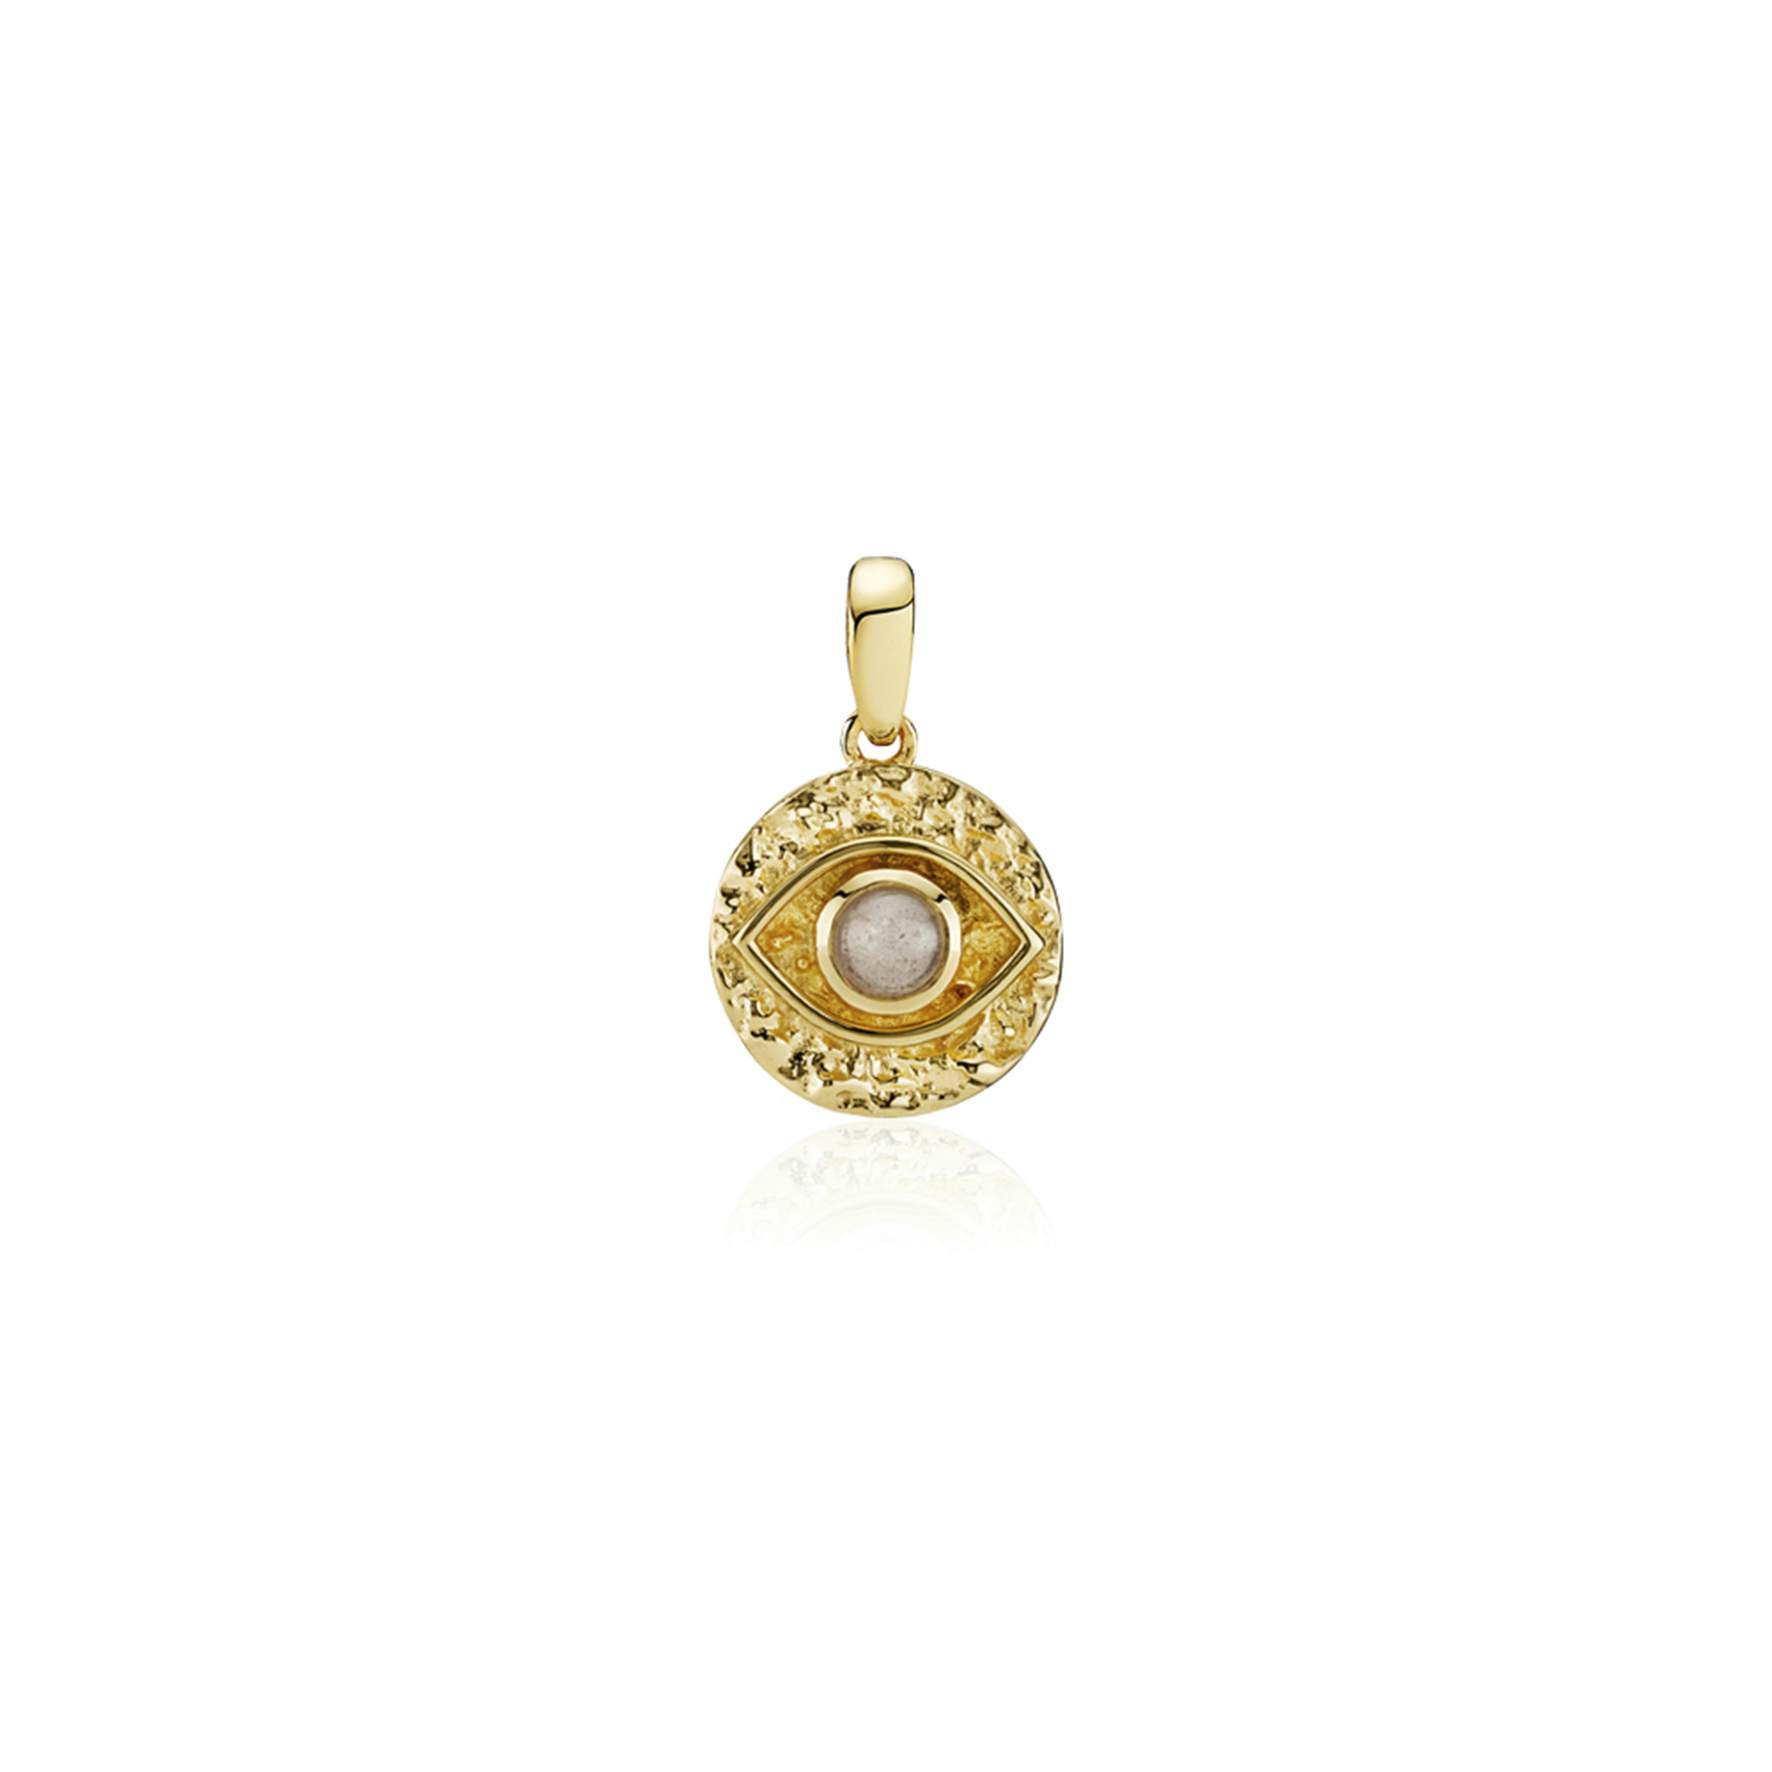 Hanna Martine by Sistie Pendant from Sistie in Goldplated-Silver Sterling 925